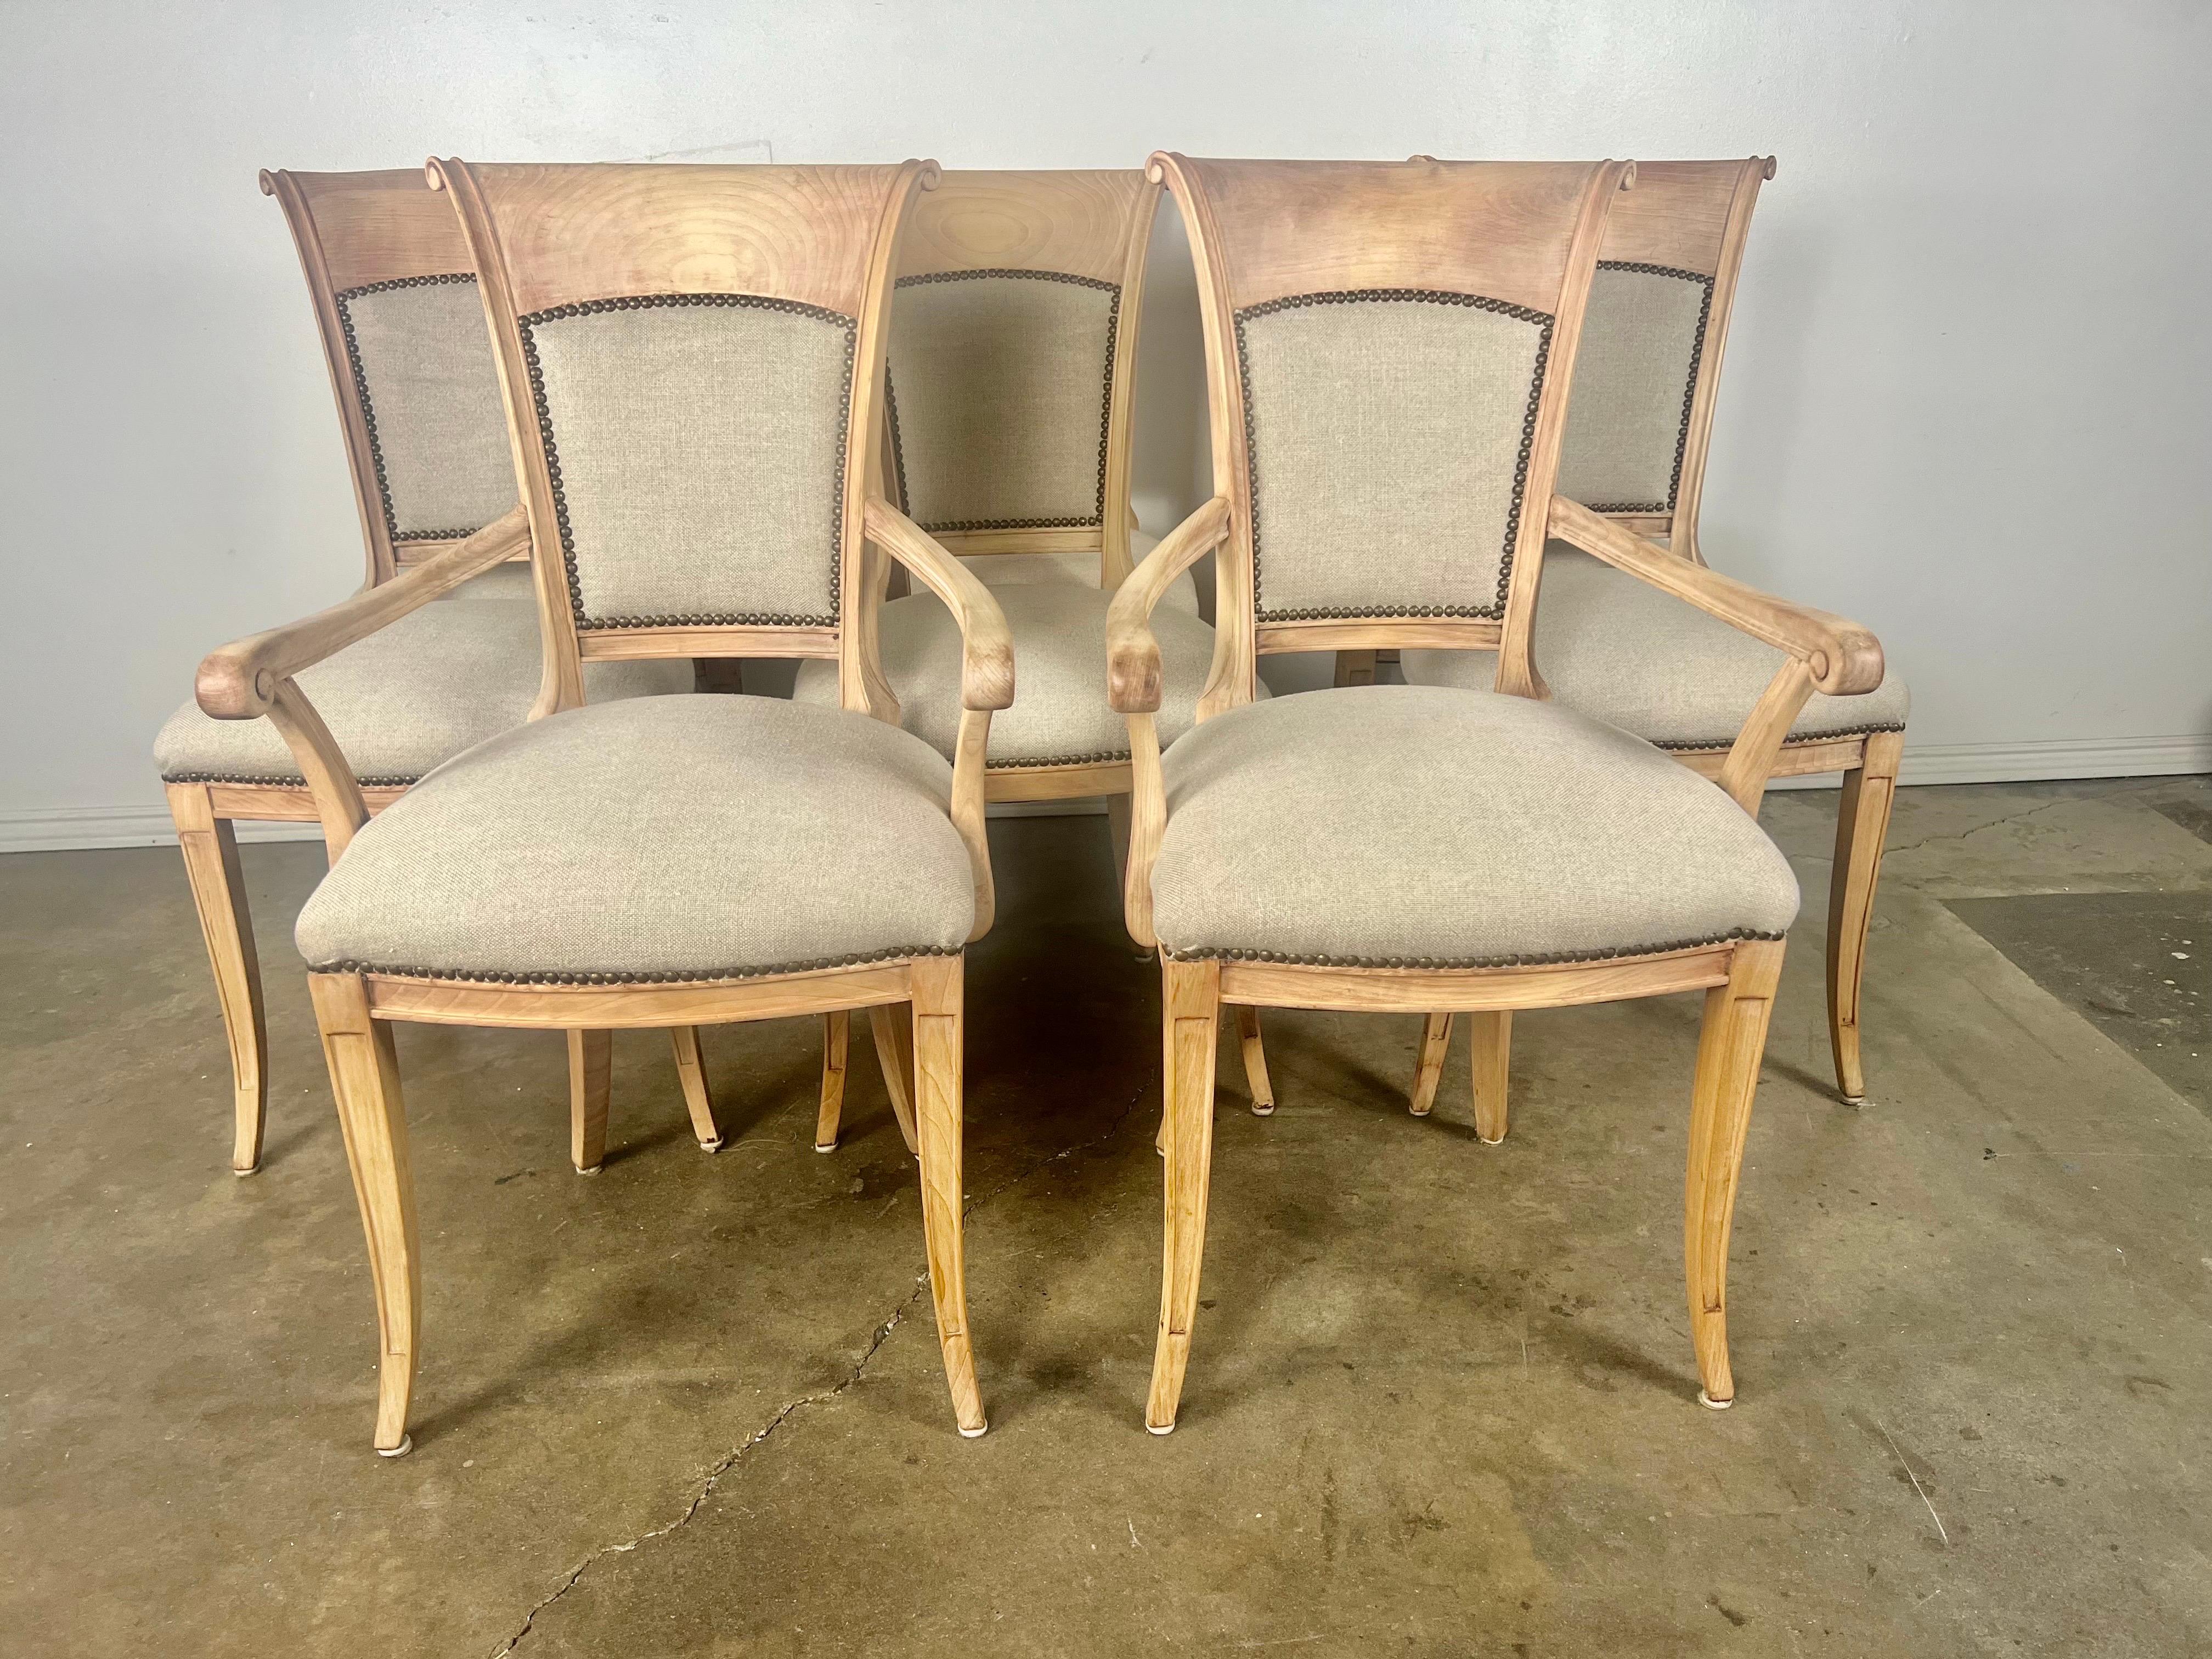 Set of eight Swedish dining chairs in a natural wood finish.  The chairs stand on four tapered legs.  They are newly upholstered in a washed Belgium linen and detailed with antique brass colored nailheads.

Size of Armchairs-38